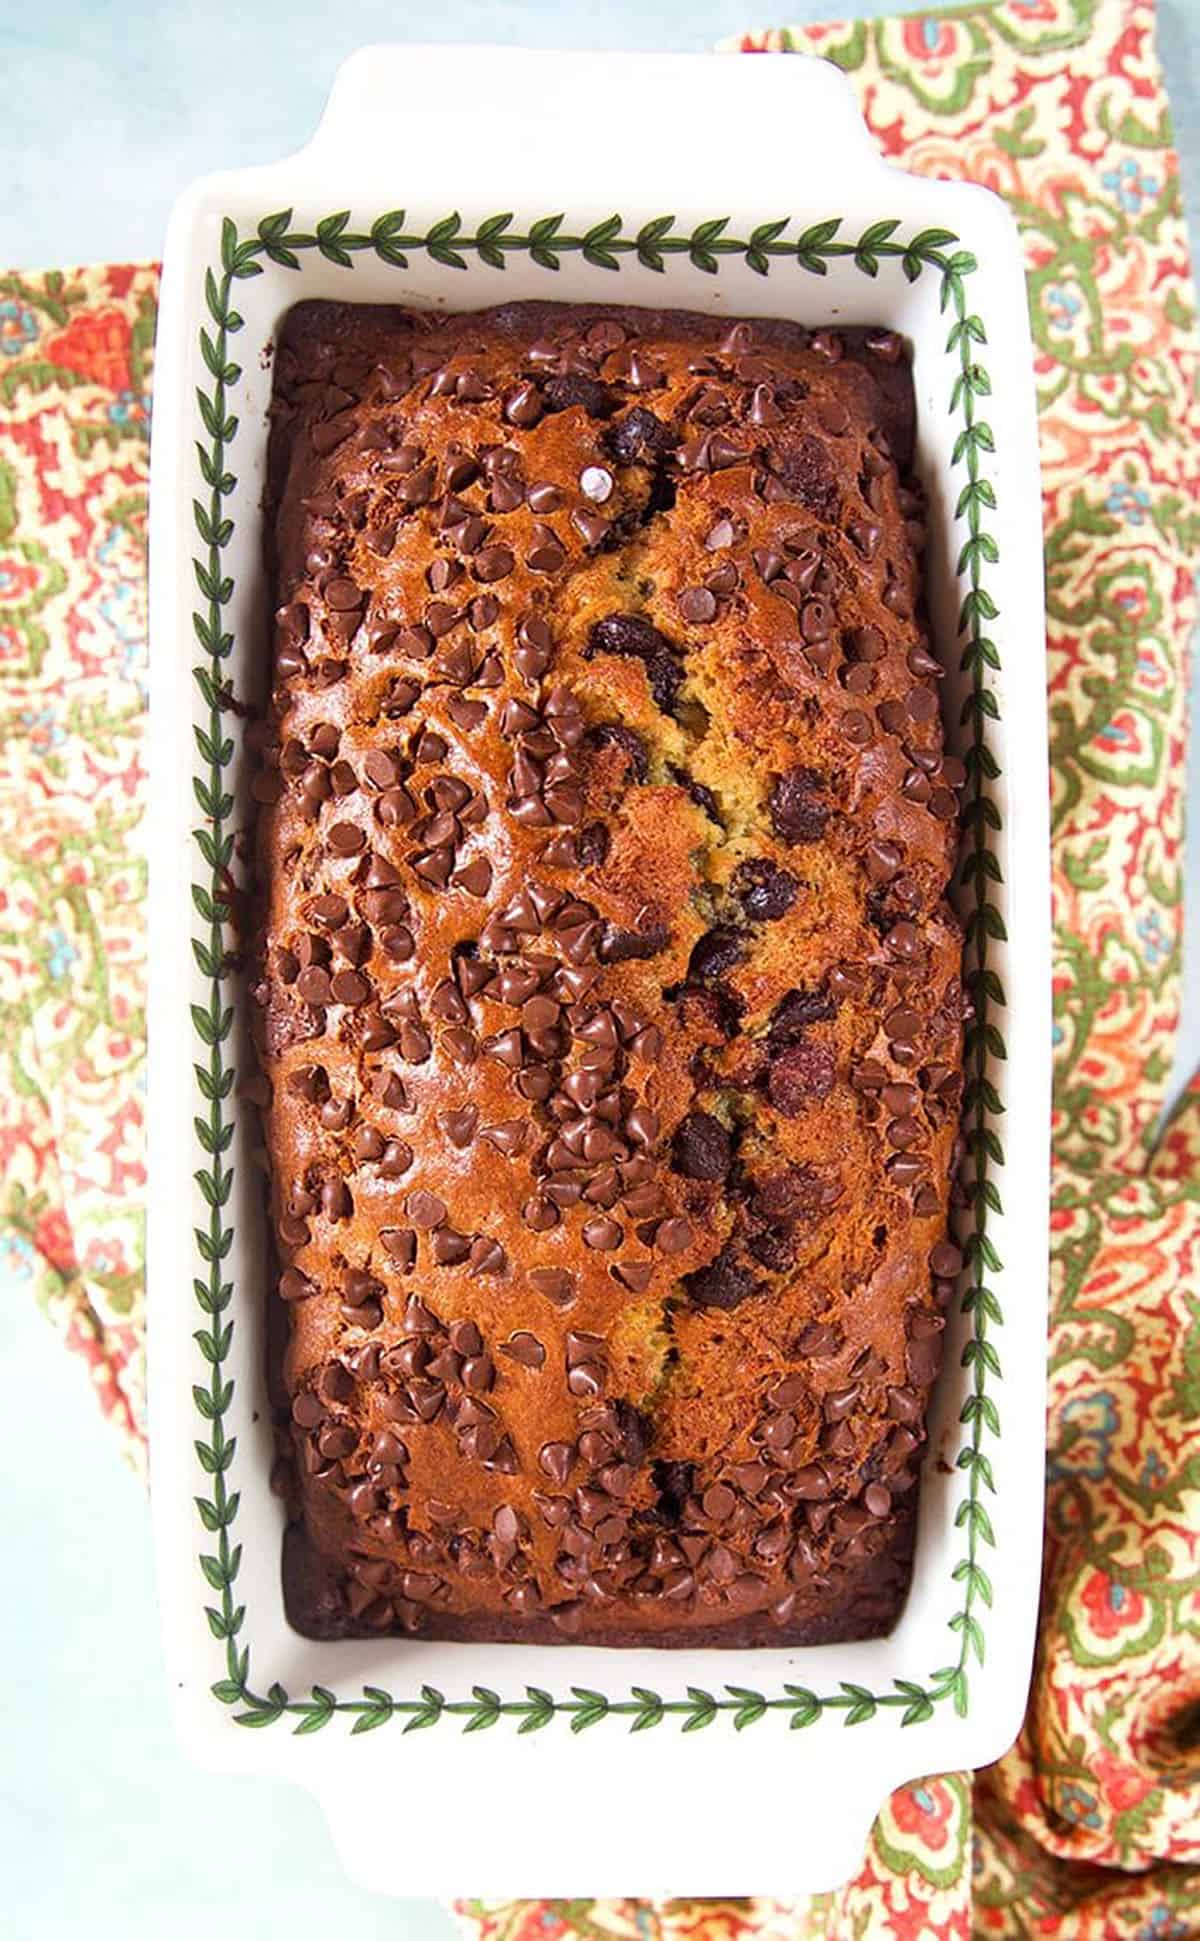 Chocolate Chip Banana Bread in a ceramic loaf pan.